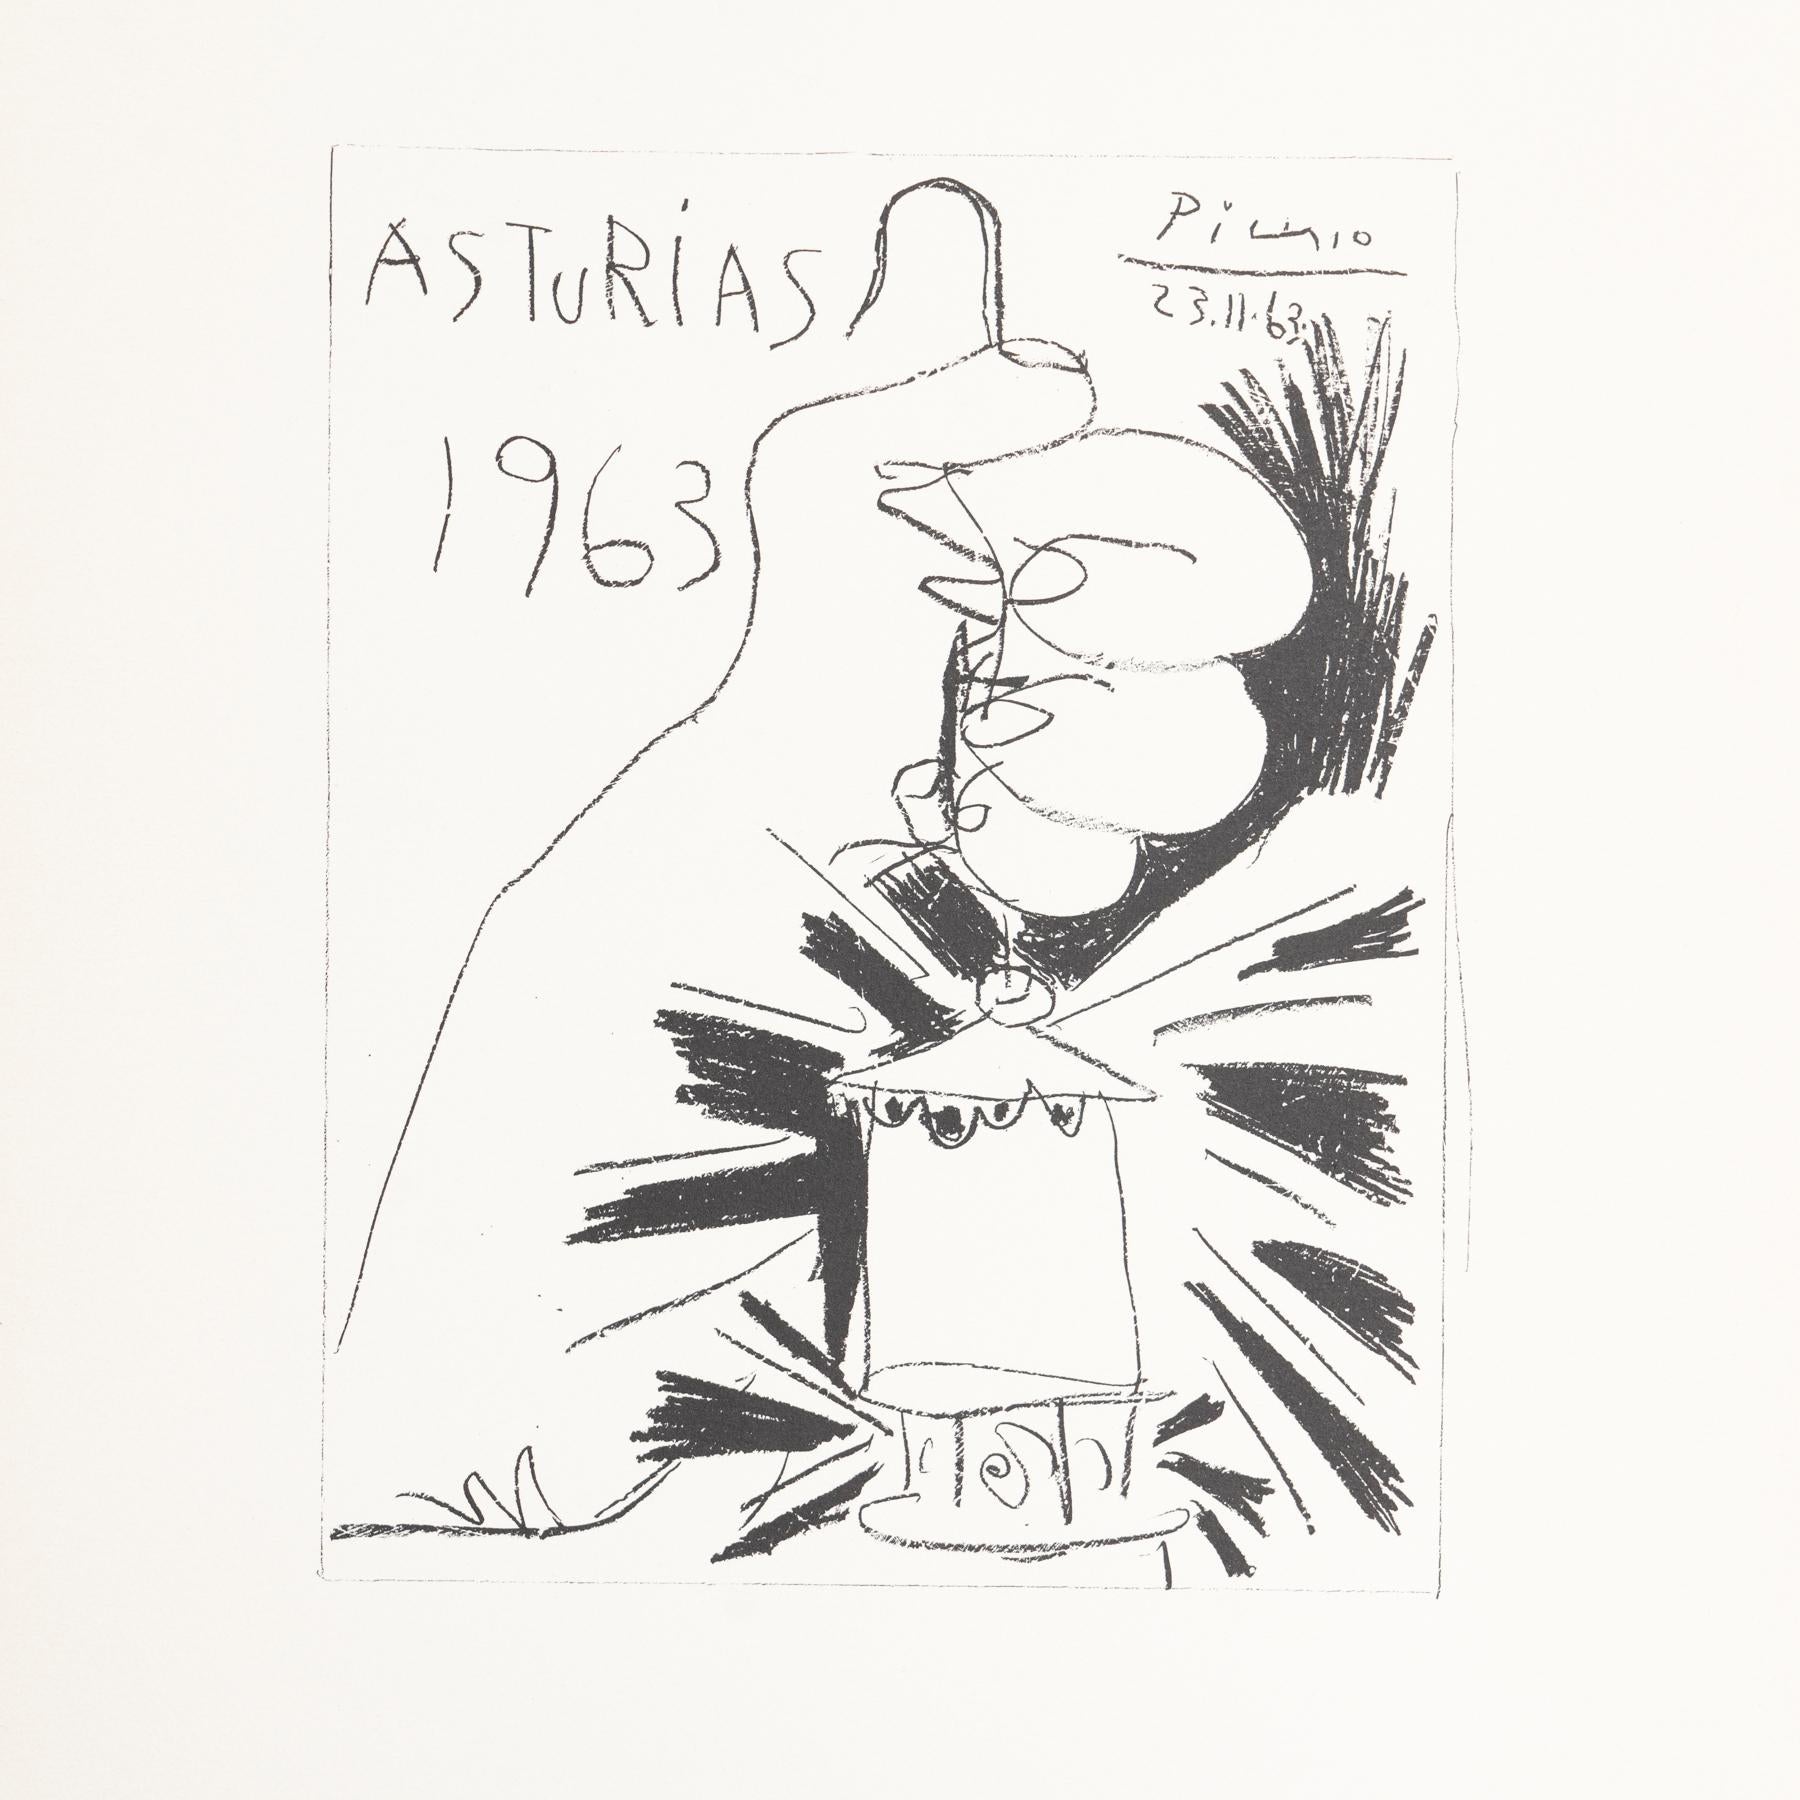 Mid-Century Modern Picasso Lithography, 'Asturias', 1963